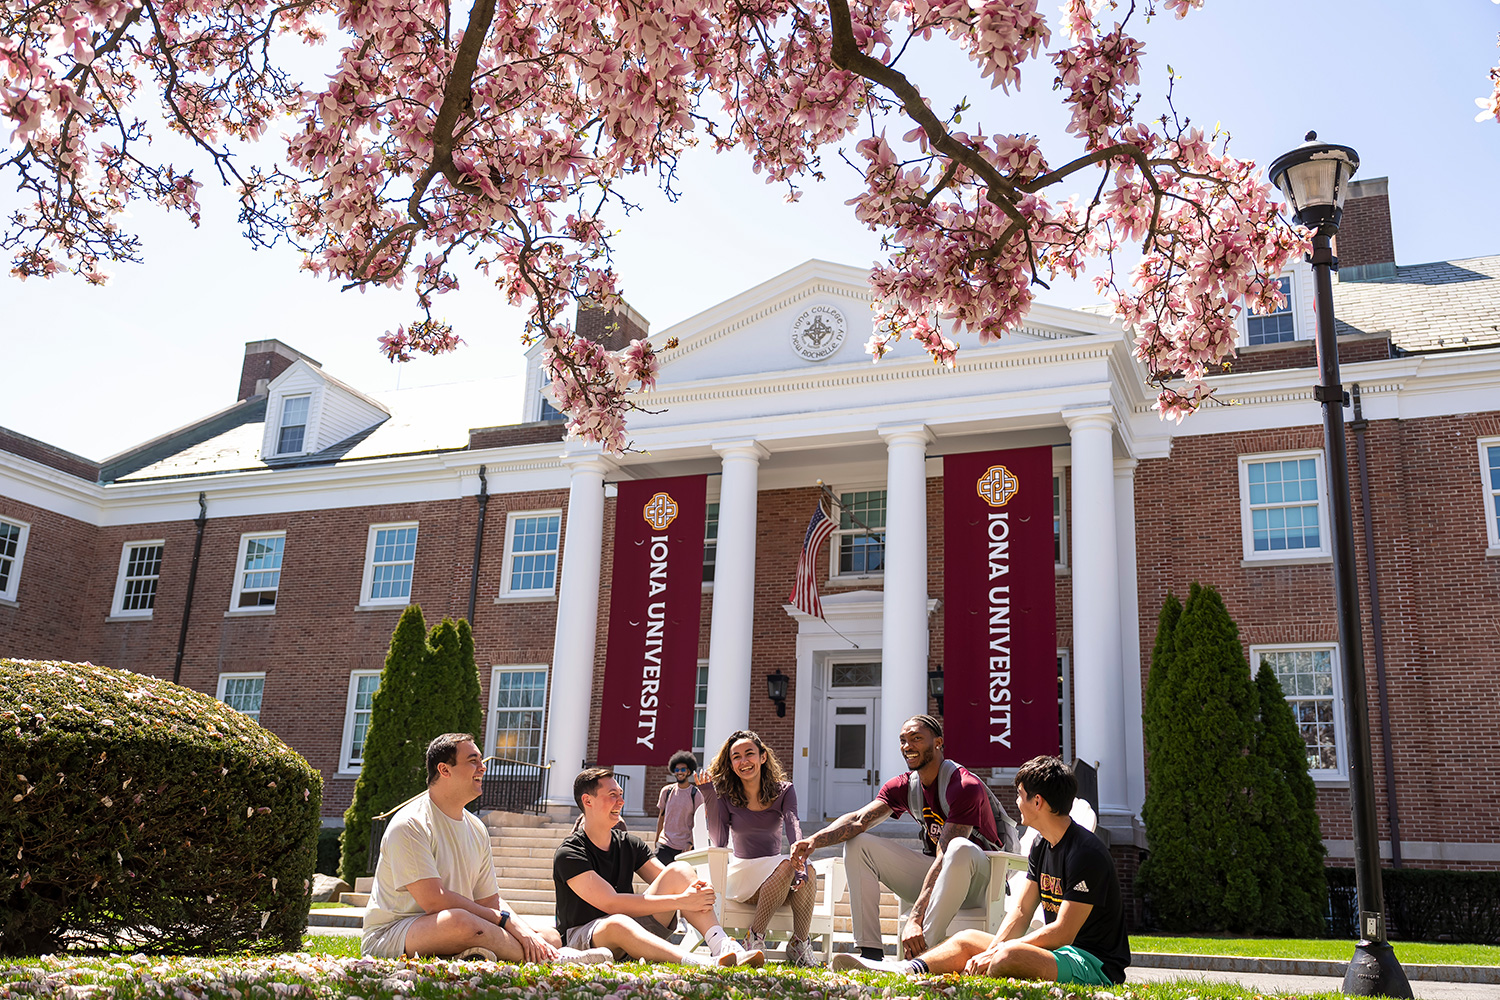 Iona students sit outside of McSpedon Hall on a sunny day and chat.